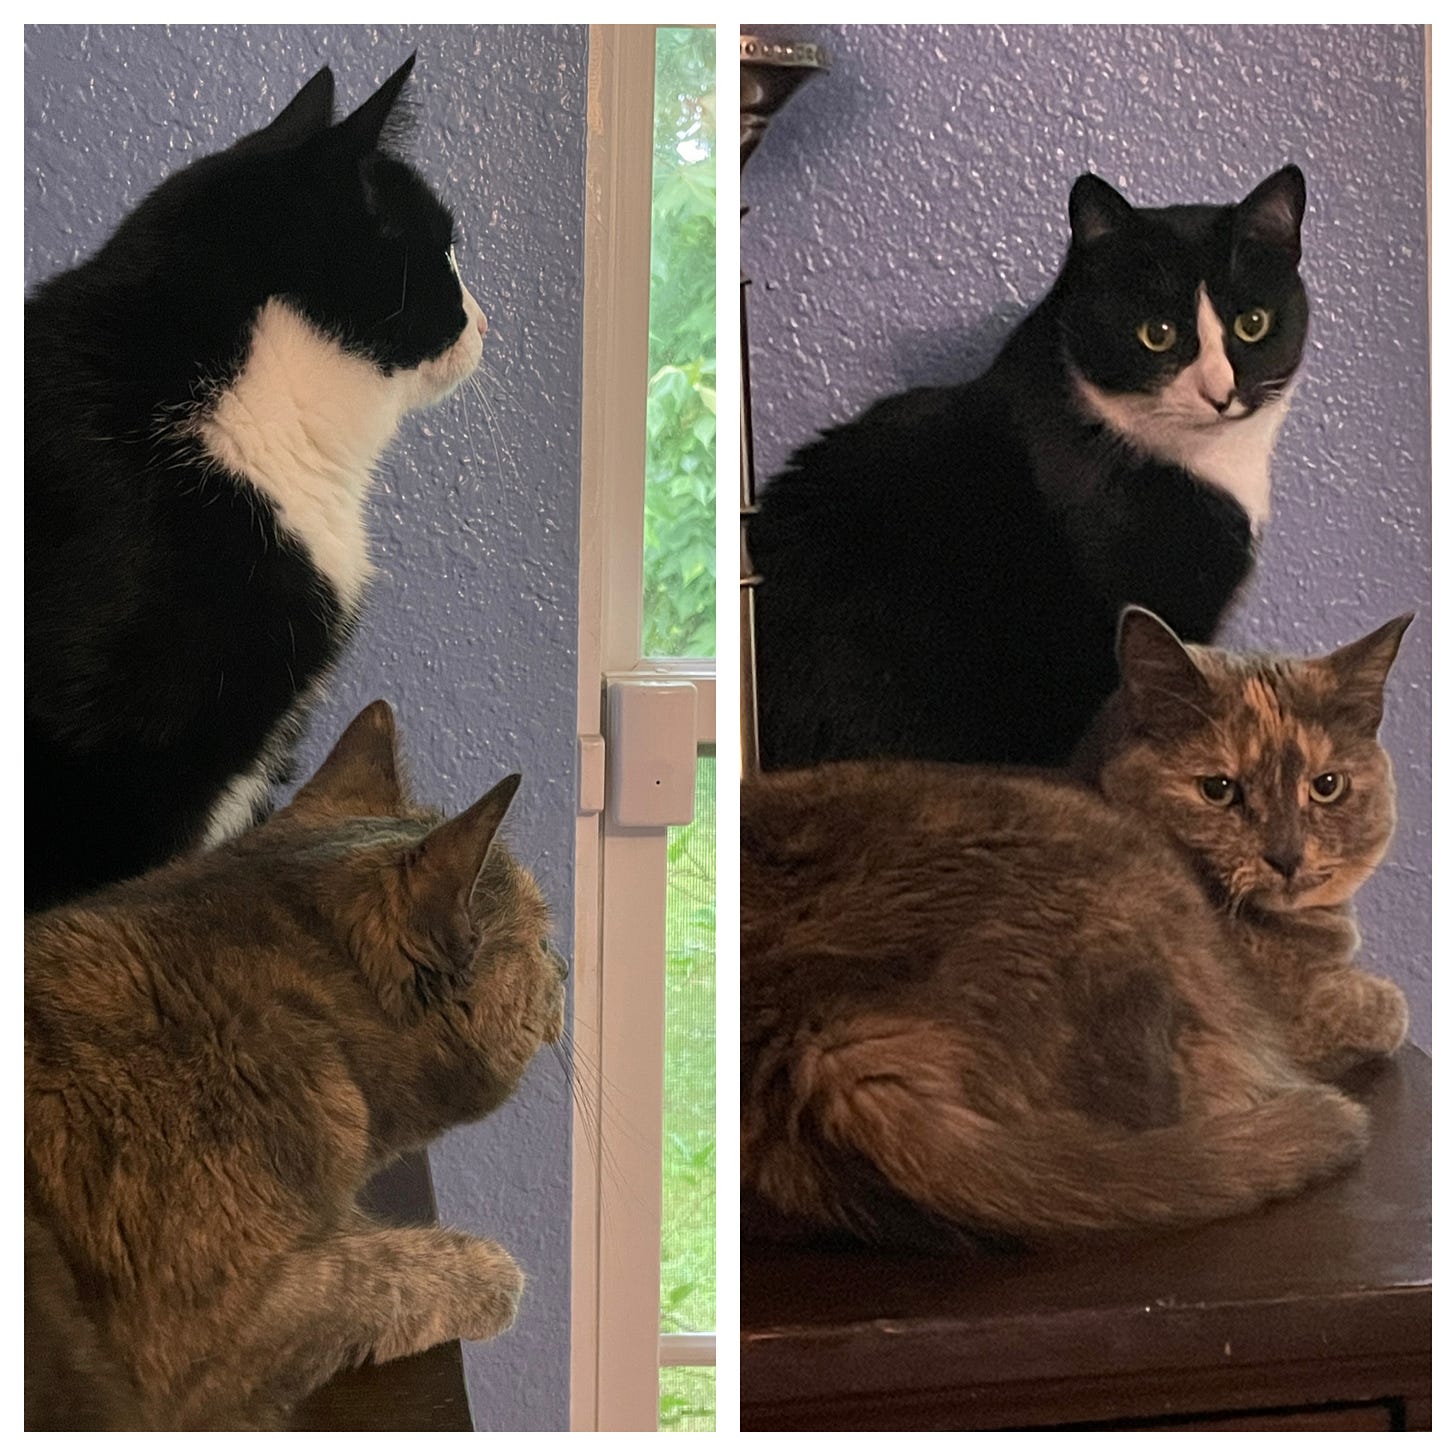 Left: Viewed in profile, a tuxedo cat (standing) and a dilute tortoiseshell cat (sitting) are seen looking out a window. Right: The same cats are looking over their shoulders at the camera.